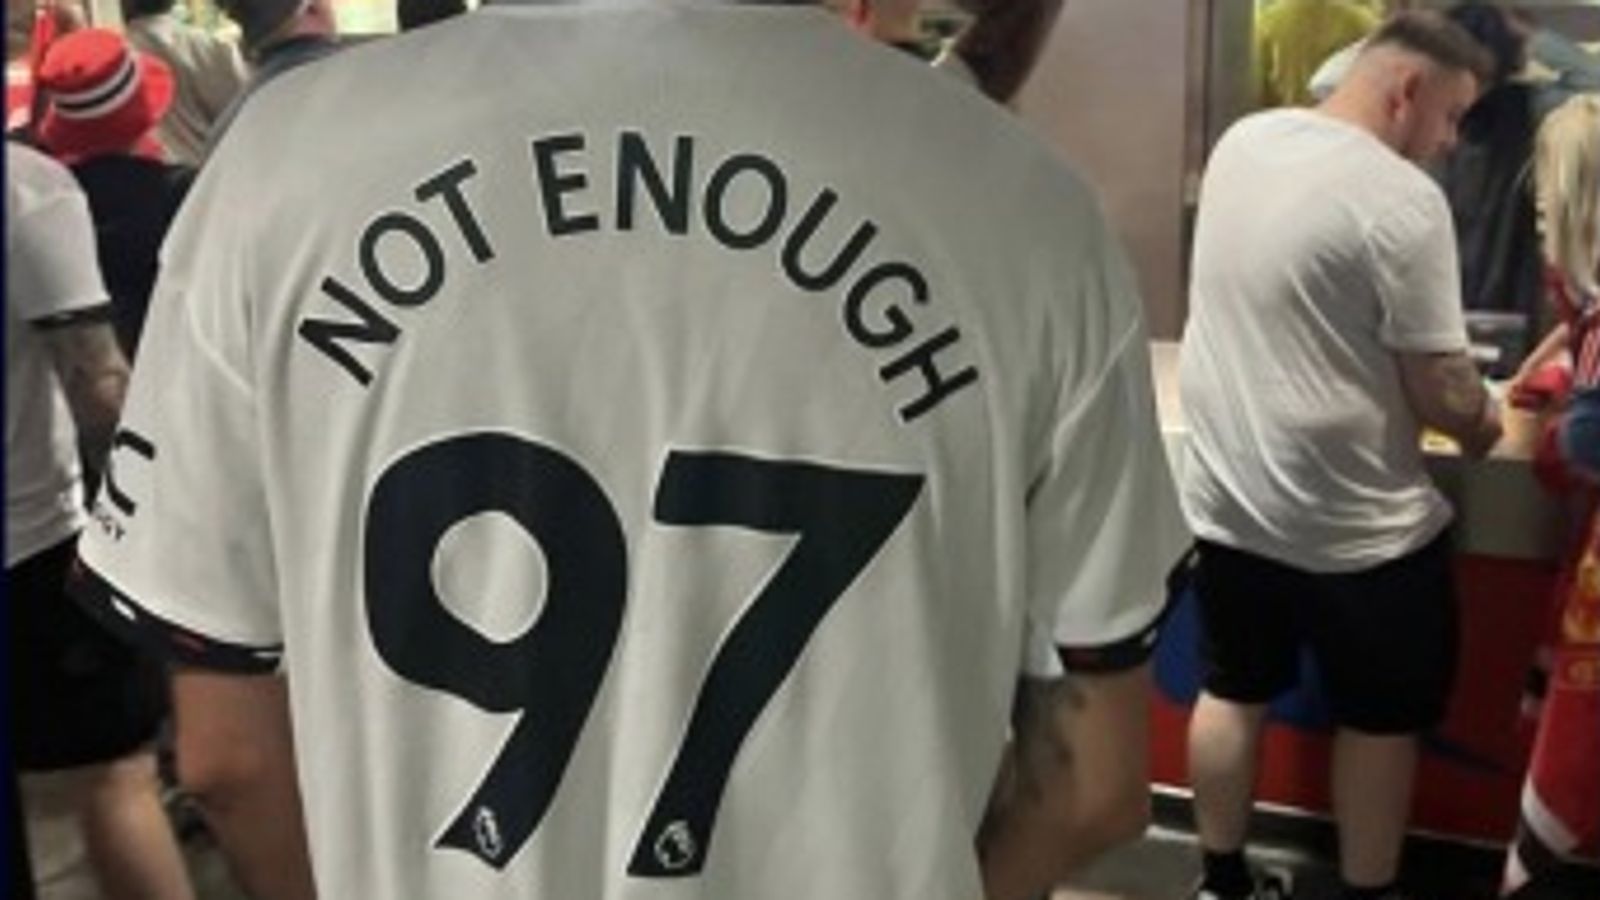 Man arrested at FA Cup final for wearing offensive Hillsborough shirt